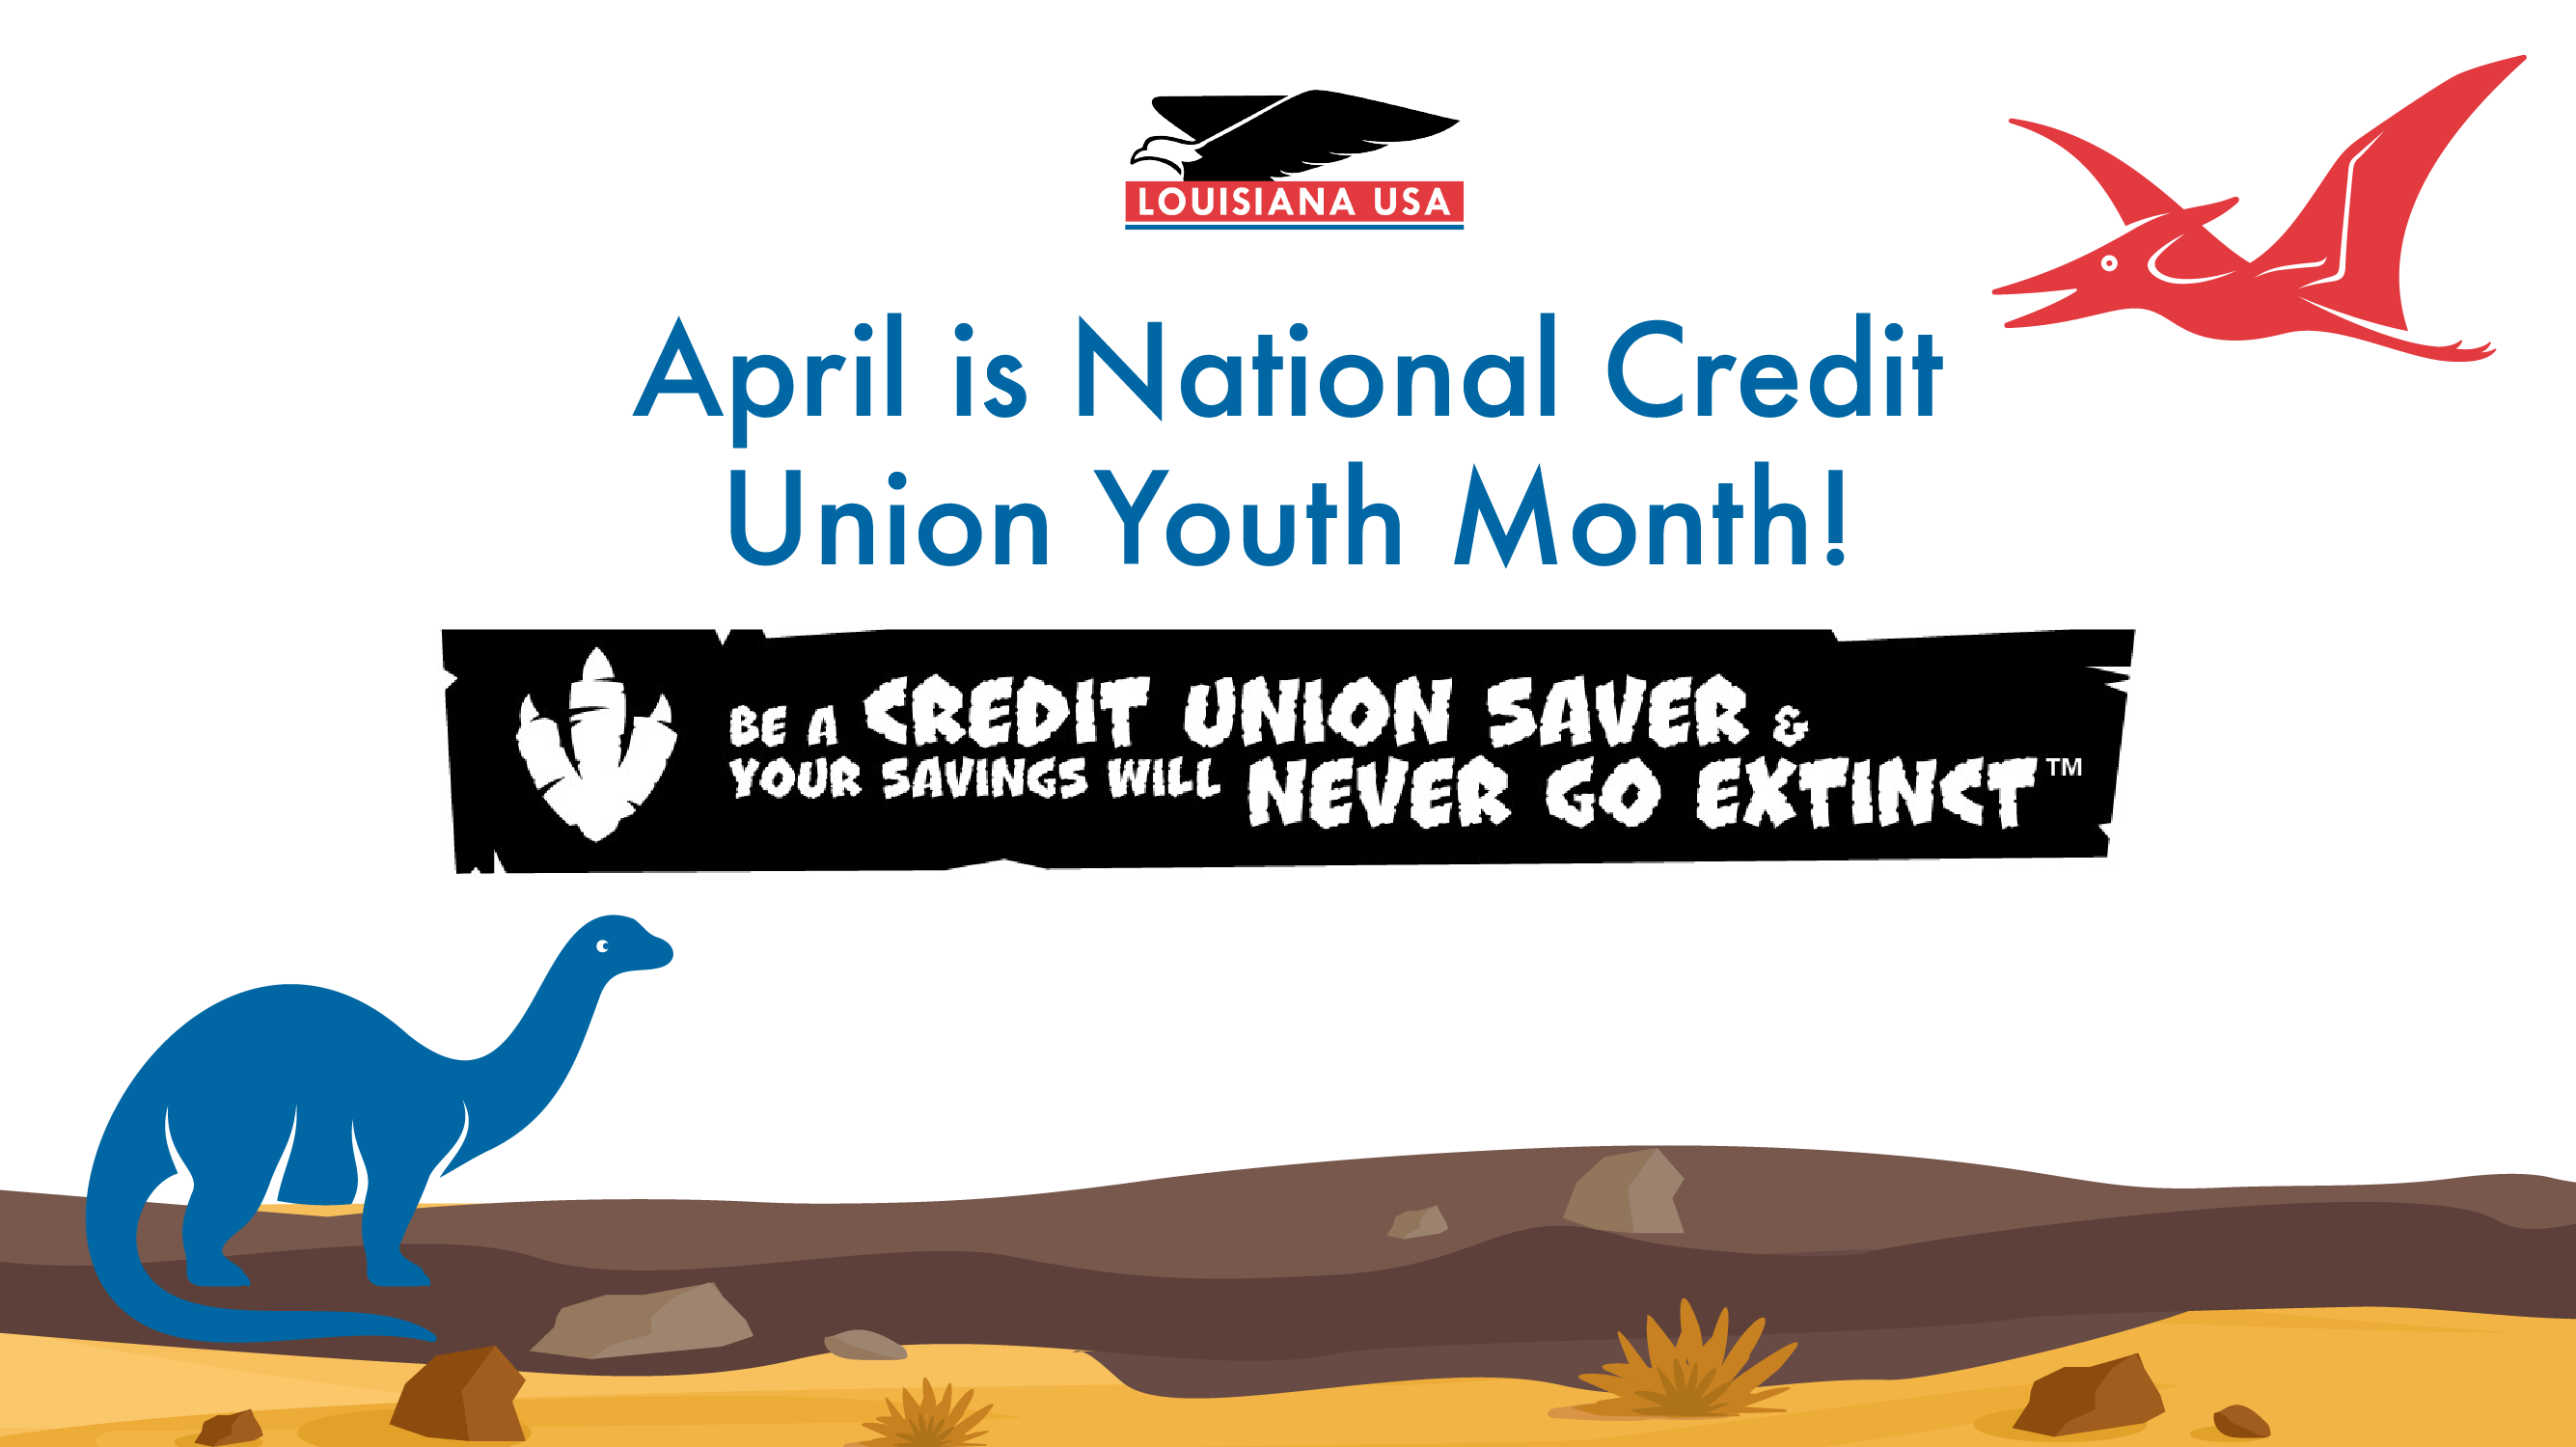 Be a credit union saver